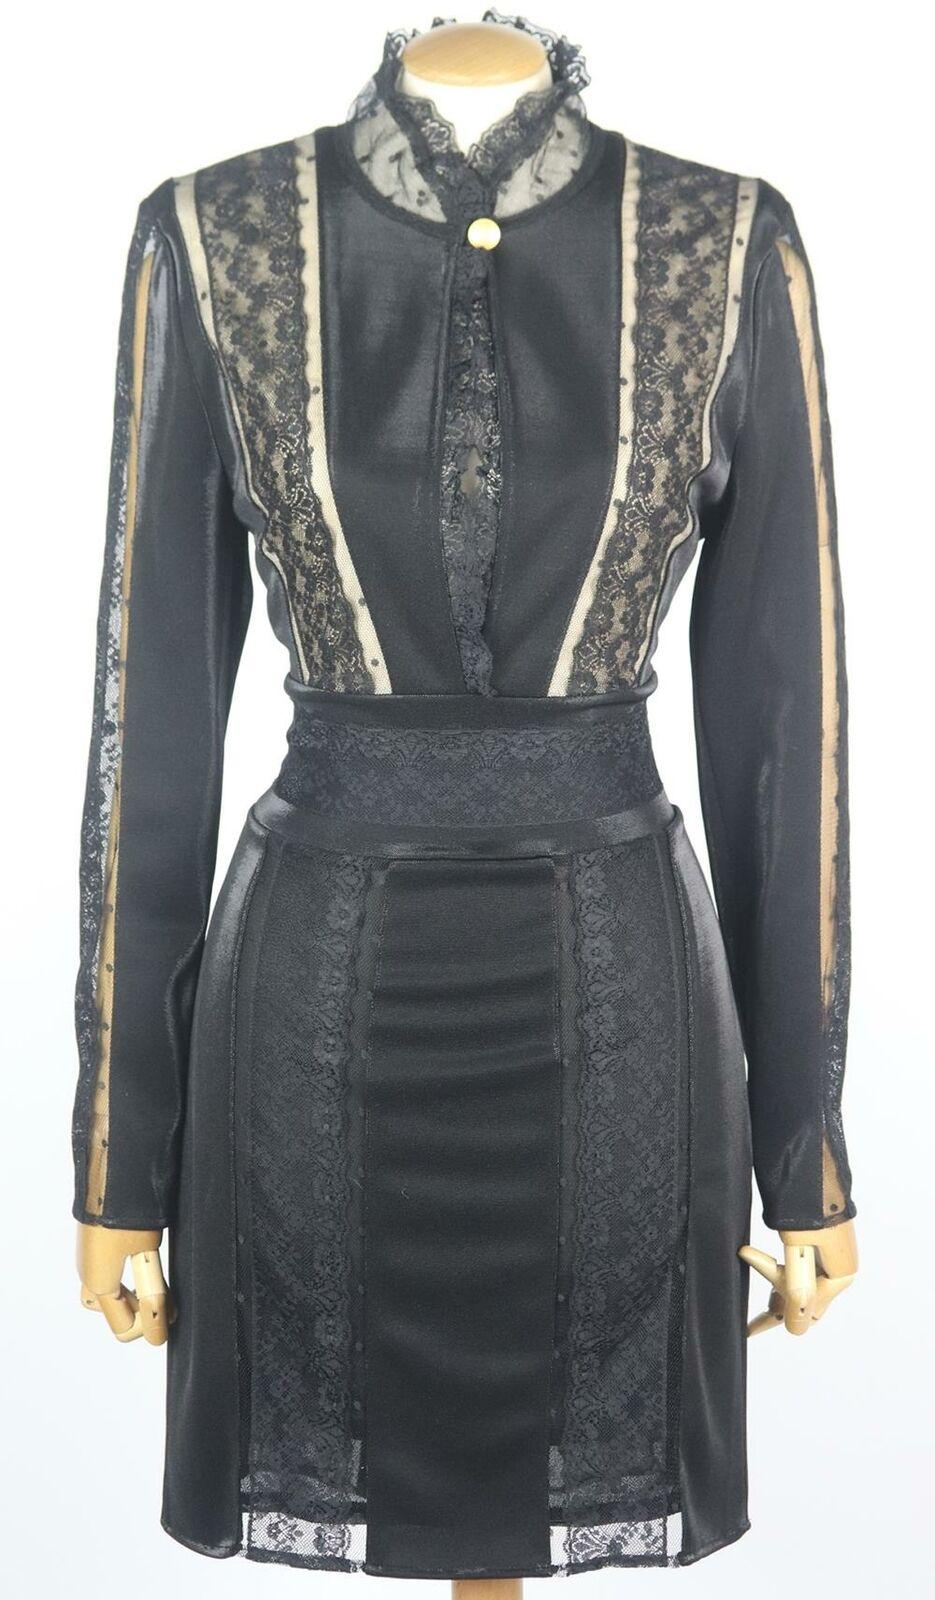 Pierre Balmain's lace-trimmed stretch knit mini dress is an immaculate LBD, it has been rendered with unforgettable details such as semi-sheer lace trim which traces along the silhouette, while the form fitting design accentuates your flattering